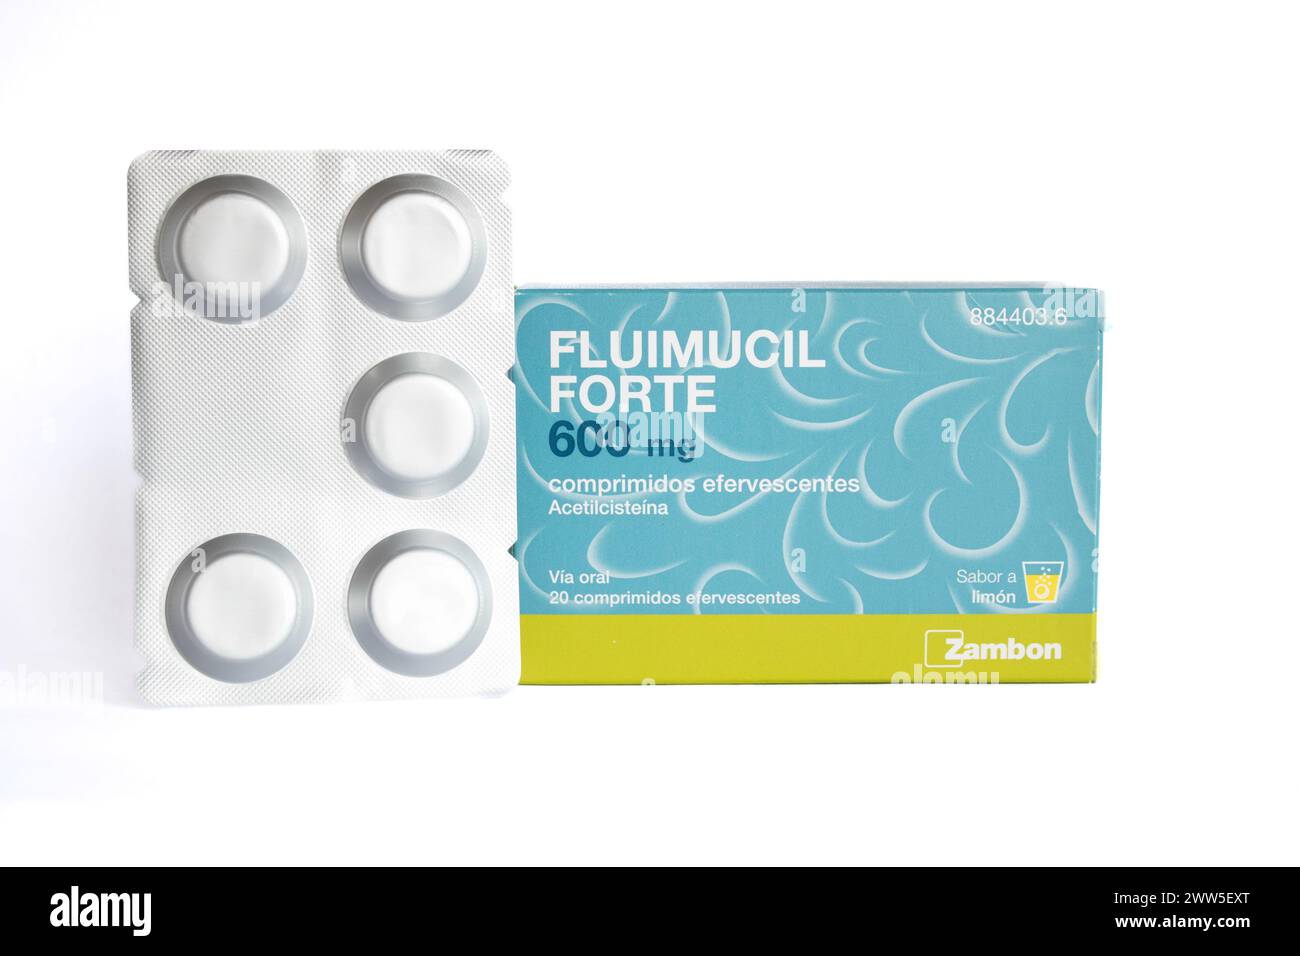 Fluimucil Forte 600mg Stock Photo